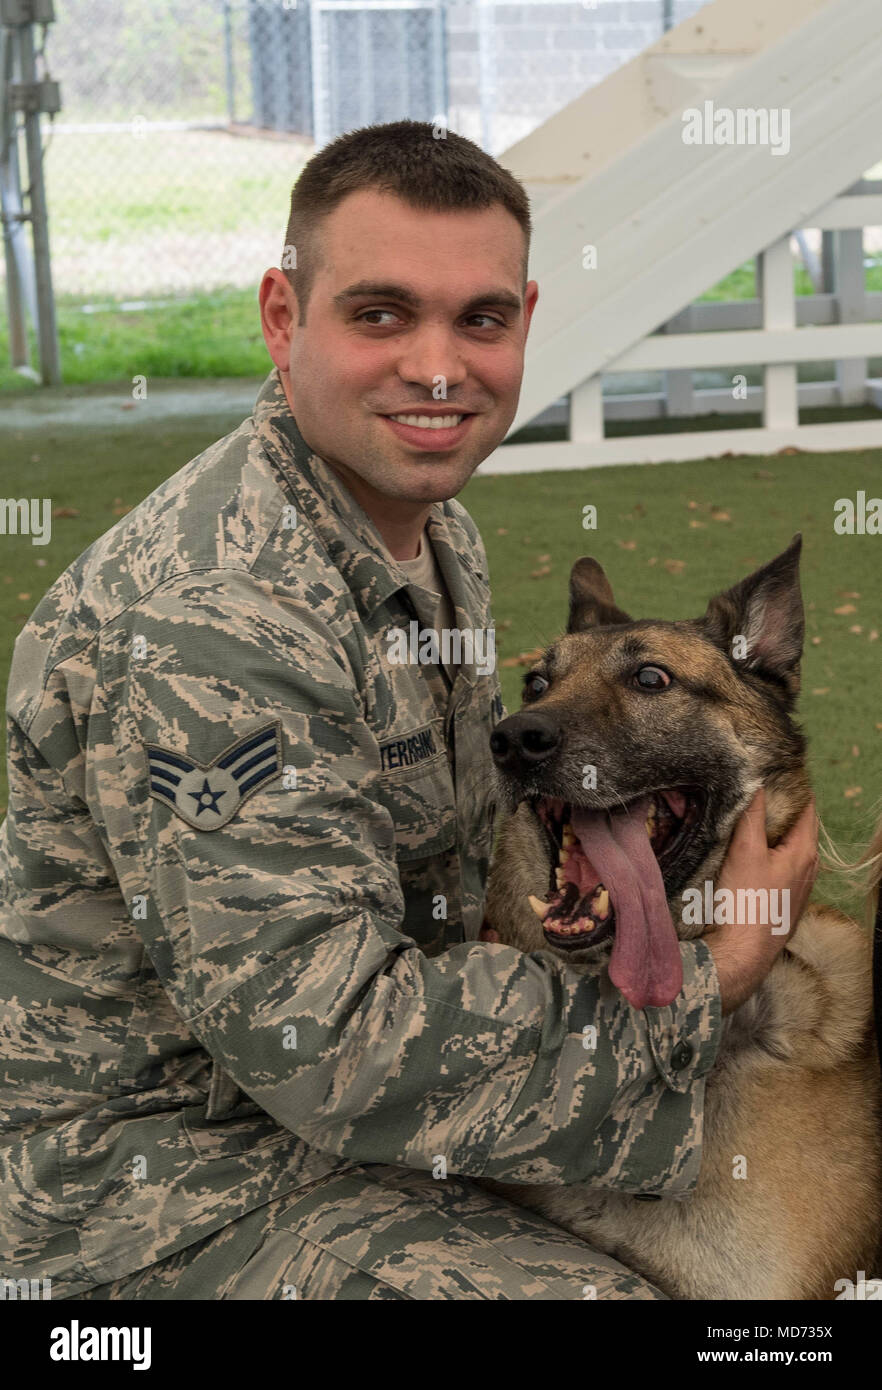 Senior Airman Jesse Terrigino, 2nd Security Forces Squadron military working dog trainer, and Kuno, 2nd SFS MWD, pose for a photo after the completion of Kuno’s retirement ceremony at Barksdale Air Force Base, La., March 16, 2018. Kuno was adopted by Terrigino and is staying with him for the rest of his life. (U.S. Air Force photo by Airman 1st Class Tessa B. Corrick) Stock Photo